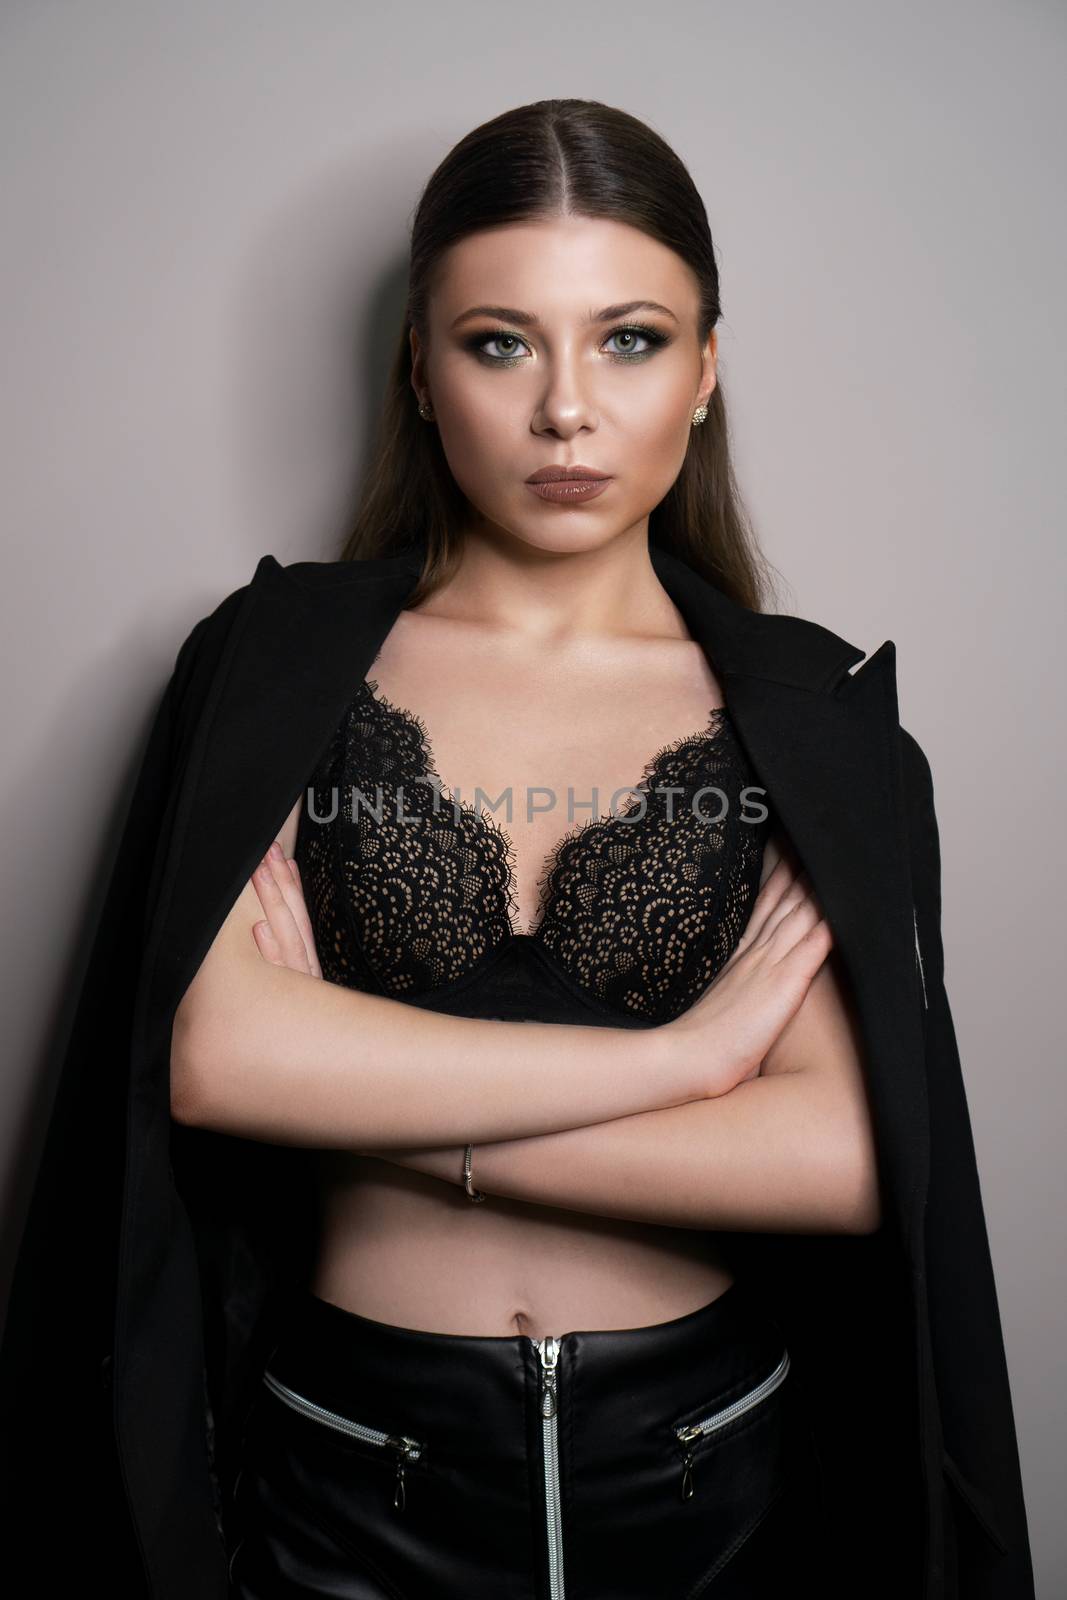 Beautiful young white girl close-up in a black jacket on a gray background. Make-up artist, beauty salon, magazine. Arms crossed. Vertical portrait.